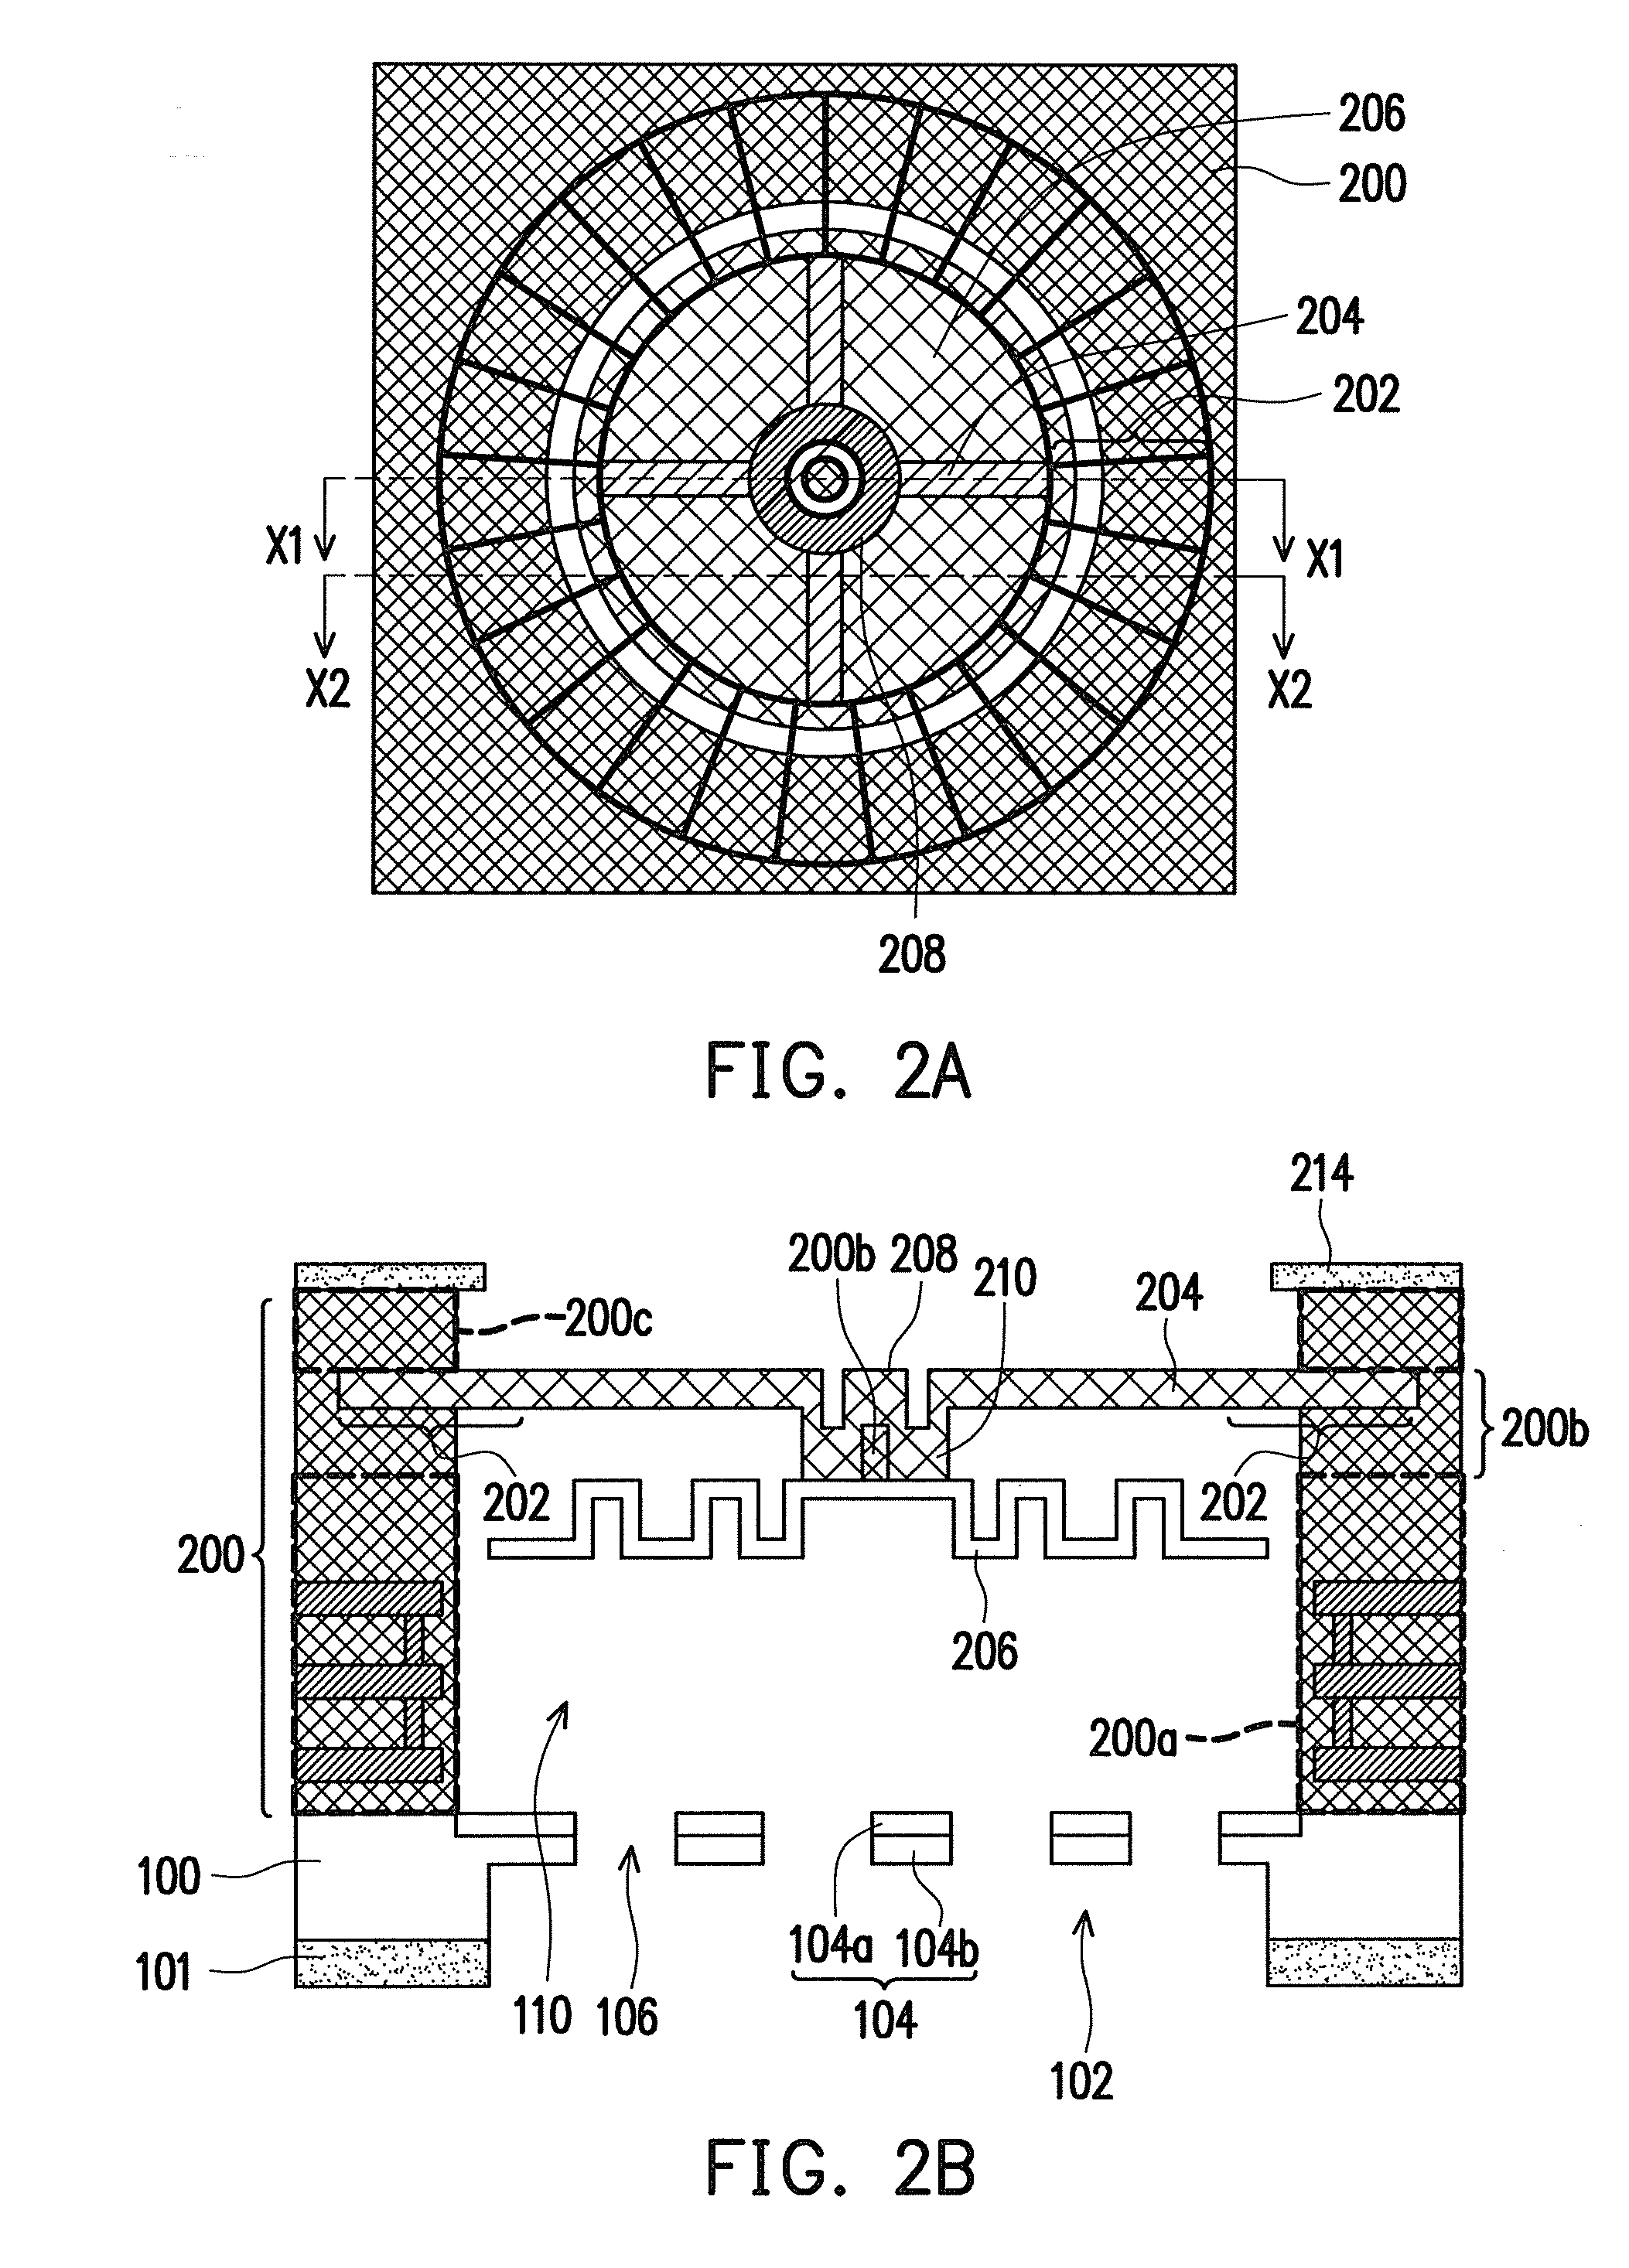 Method for fabricating micro-electro-mechanical system (MEMS) device